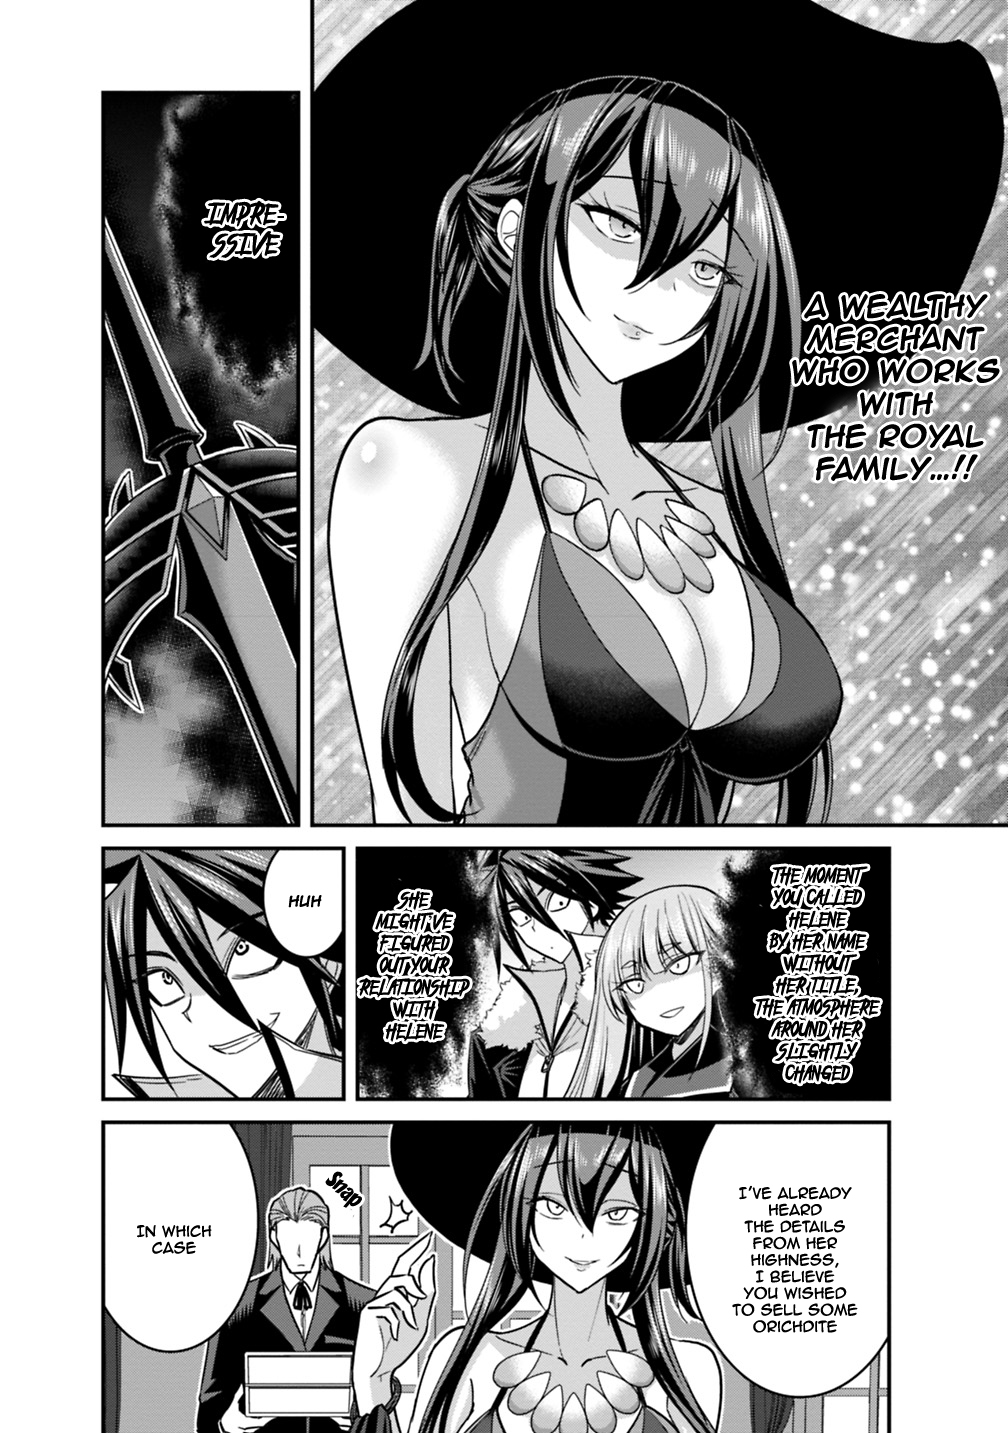 Kujibiki Tokushou Musou Harem-Ken Vol.3 Chapter 10.1: Love Can Be Negotiated!? The Whealthy Merchant Delfina! - Picture 3